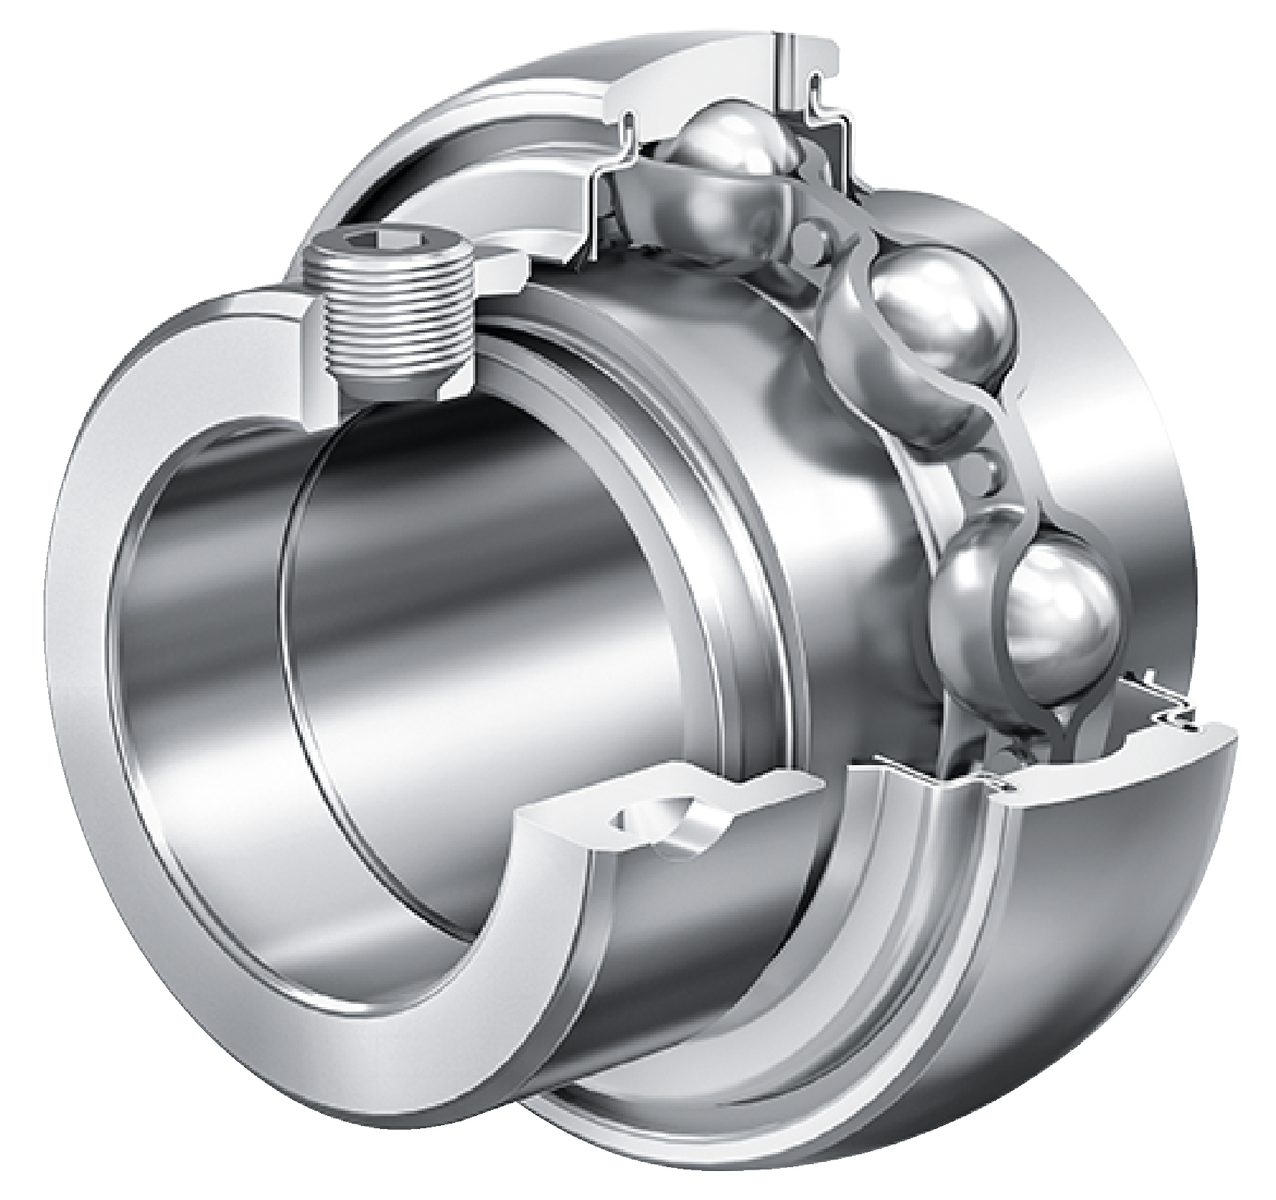 Radial Insert Ball Bearing GE..-XL-KRR-B-FA164, Spherical Outer Ring, Eccentric Locking Collar, R Seals on Both Sides, High Temperature GE90-XL-KRR-B-FA164